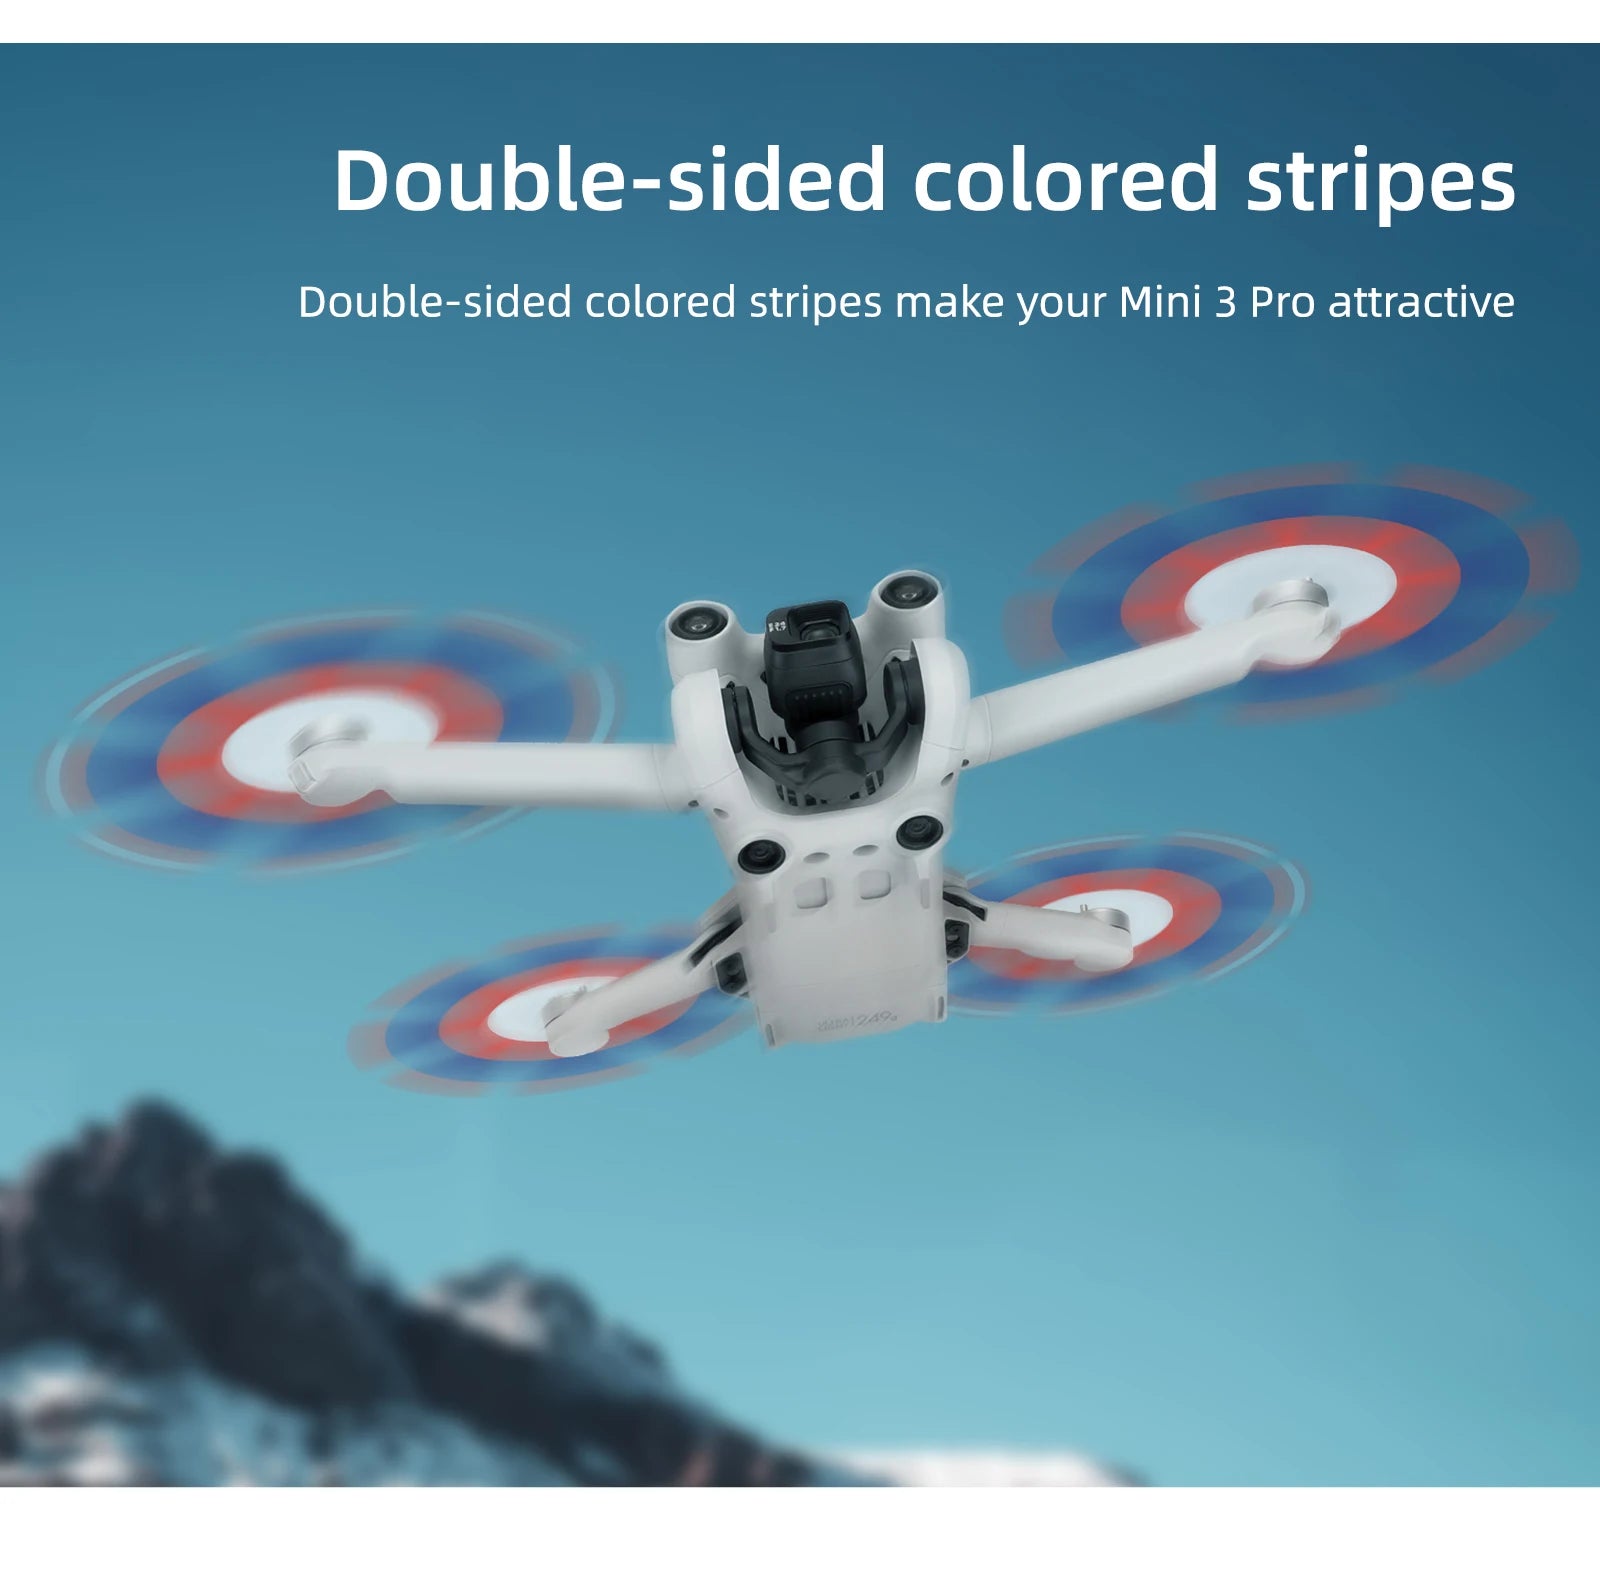 DJI Mini 3 Propeller, Double-sided colored stripes Make your Mini 3 Pro attractive D G stripes .